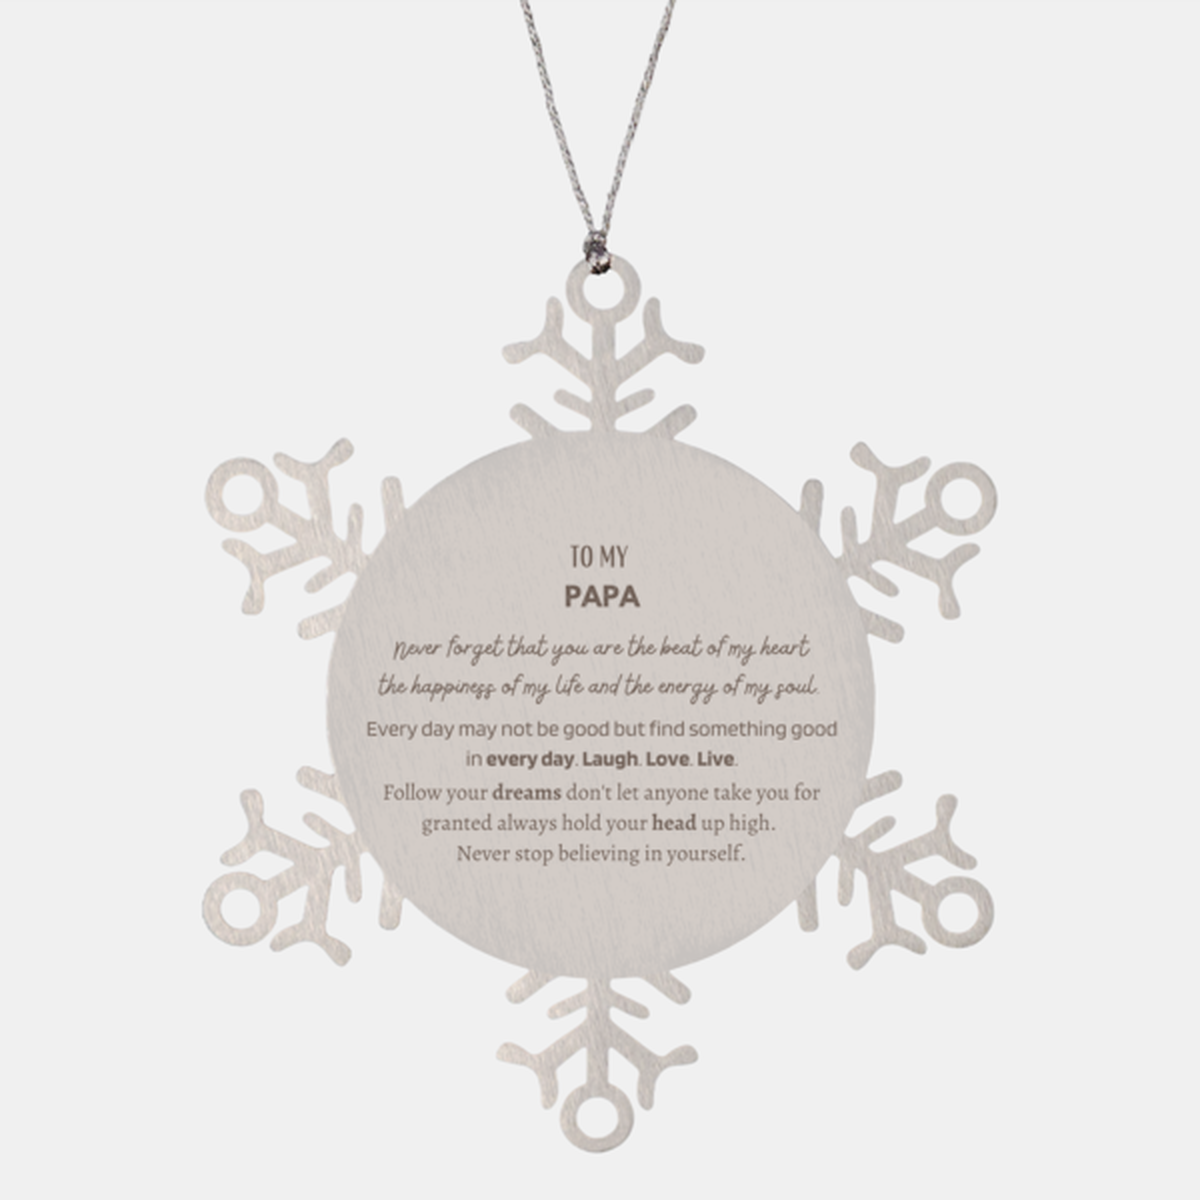 To My Papa Ornament Gifts, Christmas Papa Snowflake Ornament Present, Christmas Unique Motivational For Papa, To My Papa Never forget that you are the beat of my heart the happiness of my life and the energy of my soul